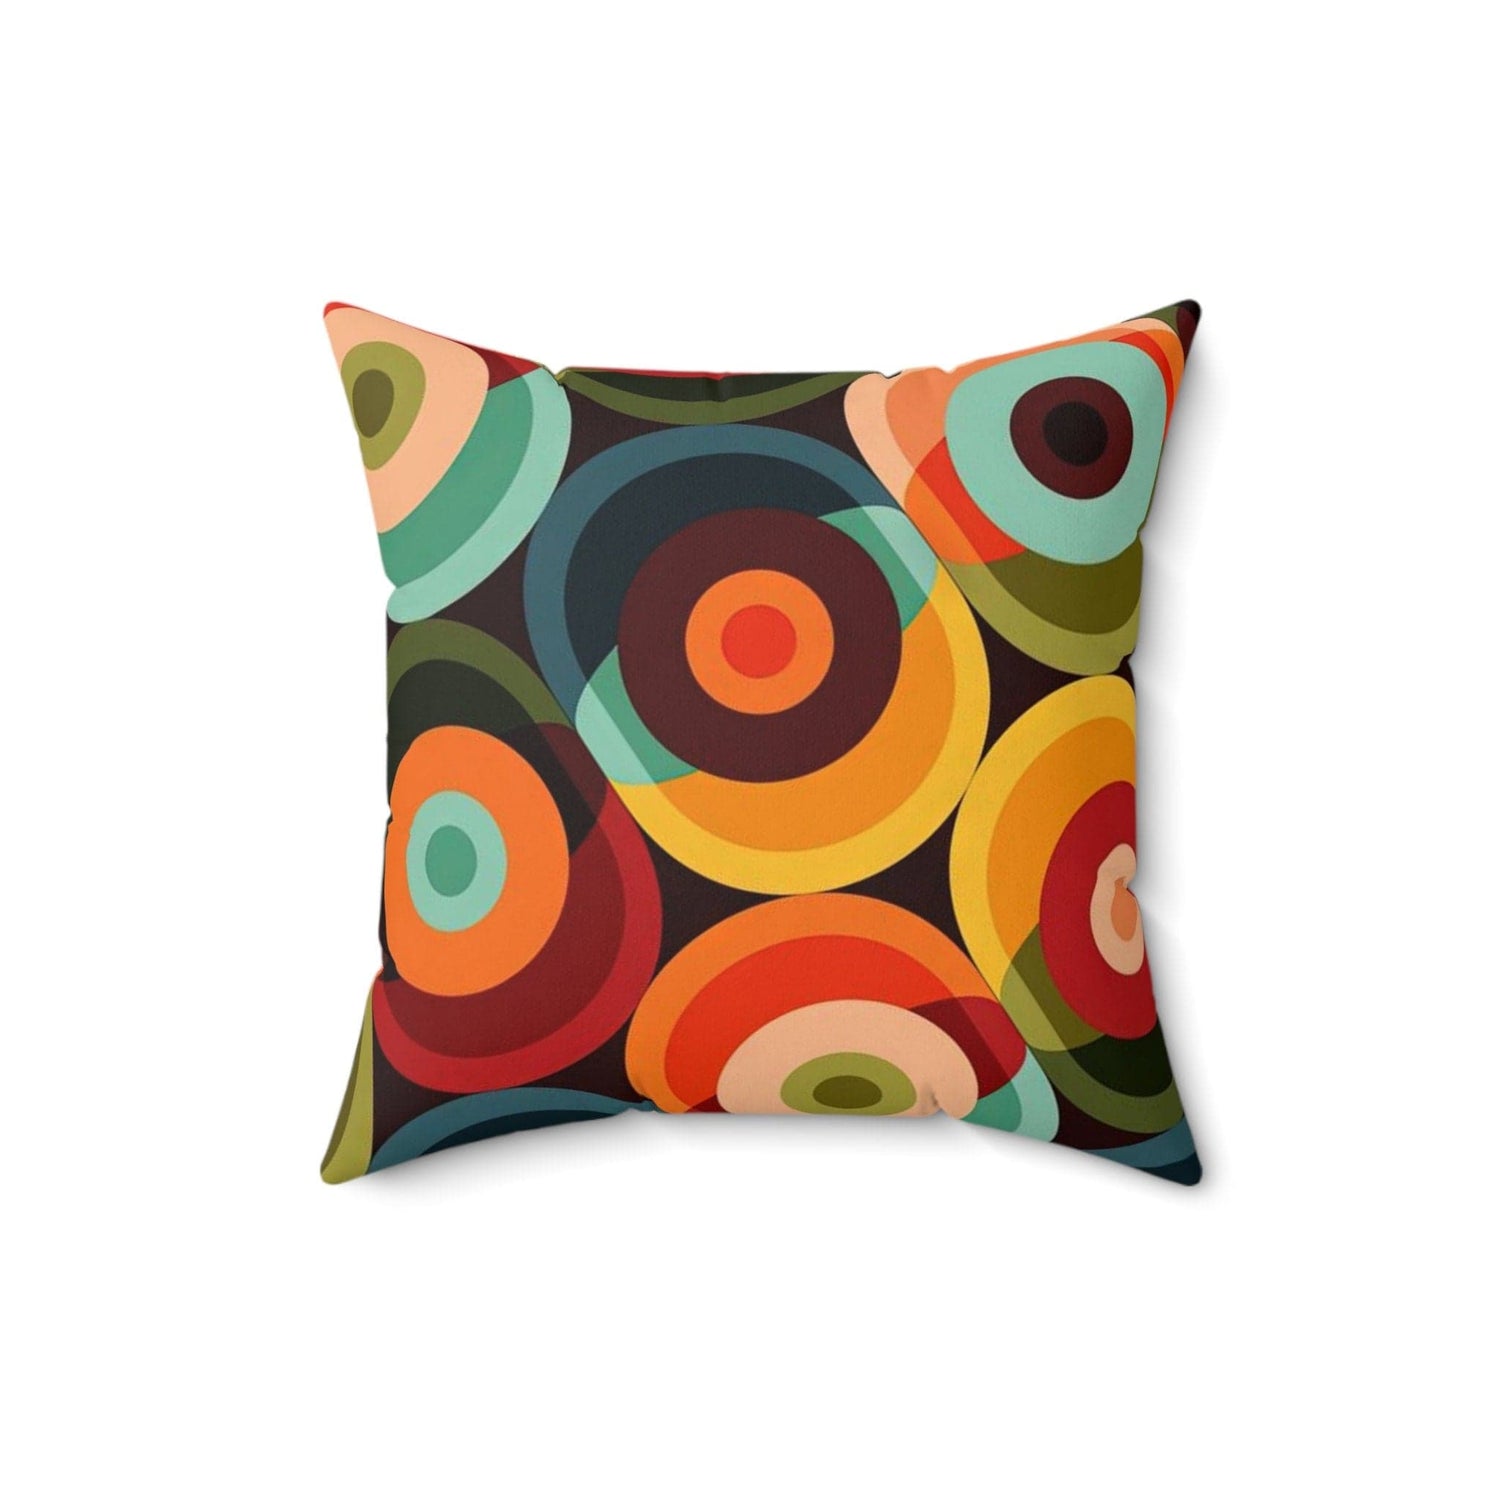 Kate McEnroe New York Retro Mid Mod Geo - Psychedelic Circles Throw Pillow, MCM Teal Orange, Yellow, Red Abstract Living Room, Bedroom Accent Pillow - 131282623Throw Pillows26154032508783369027